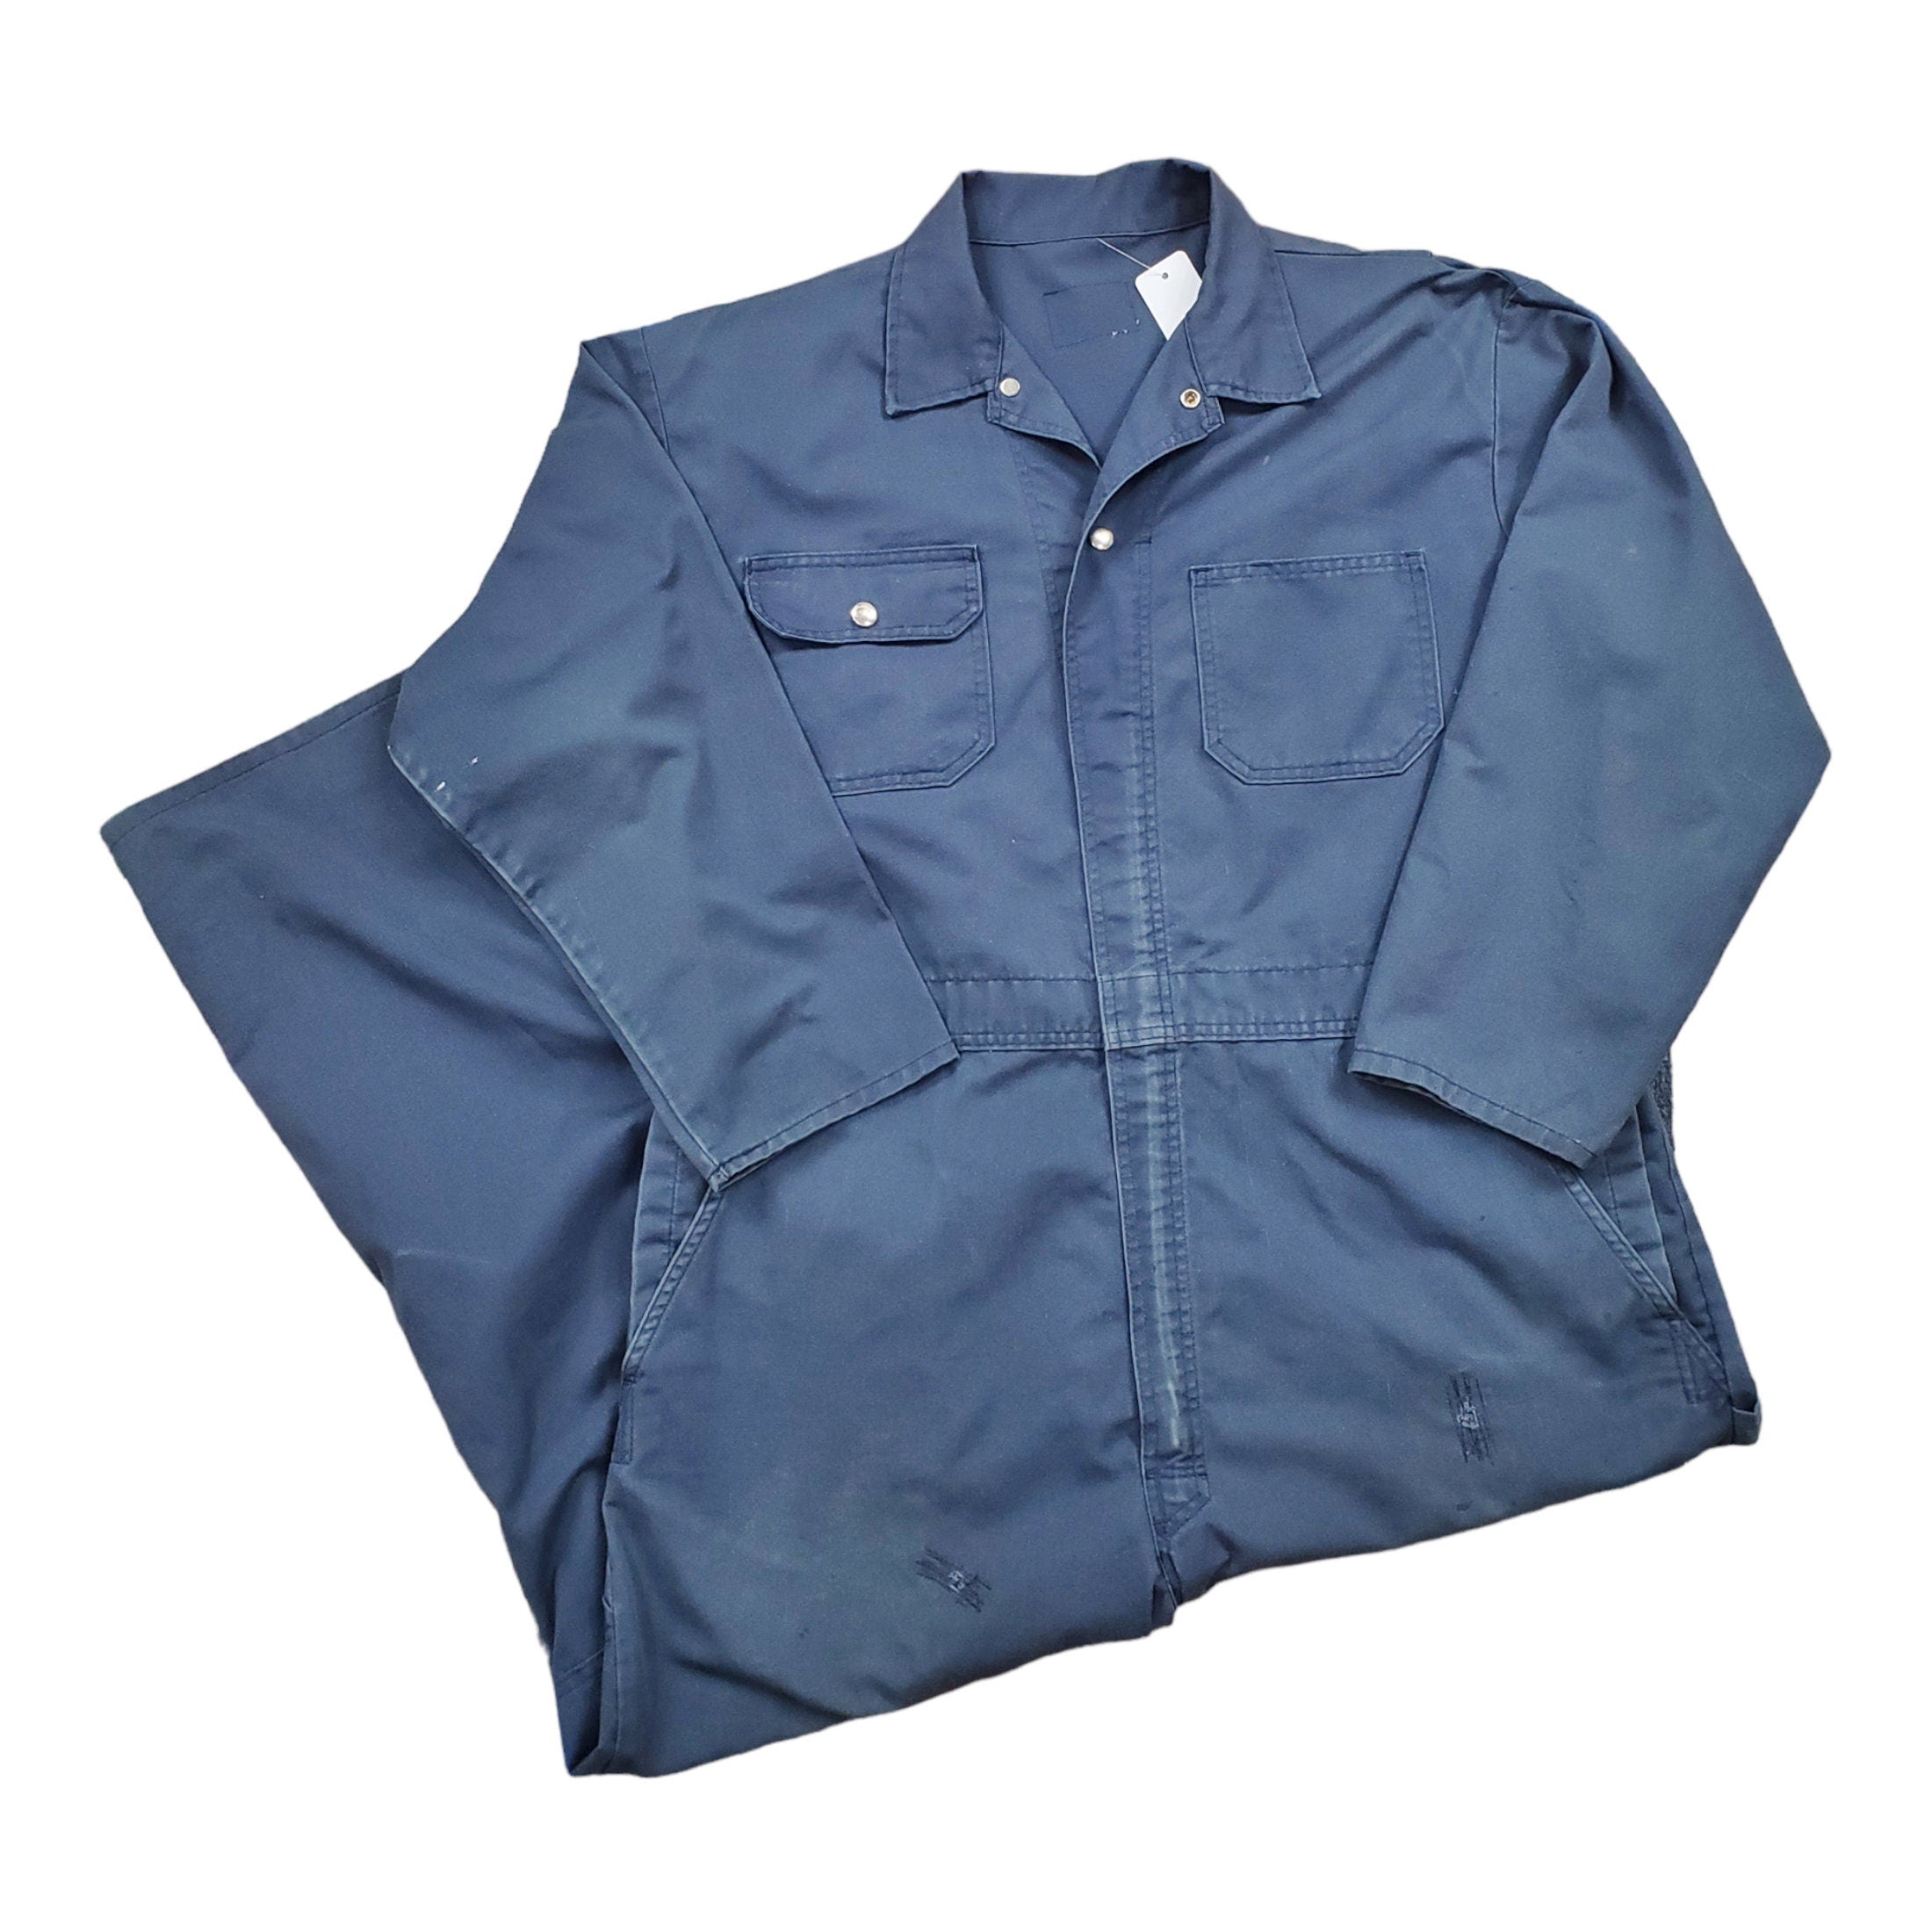 Overalls/Coveralls – People's Champ Vintage